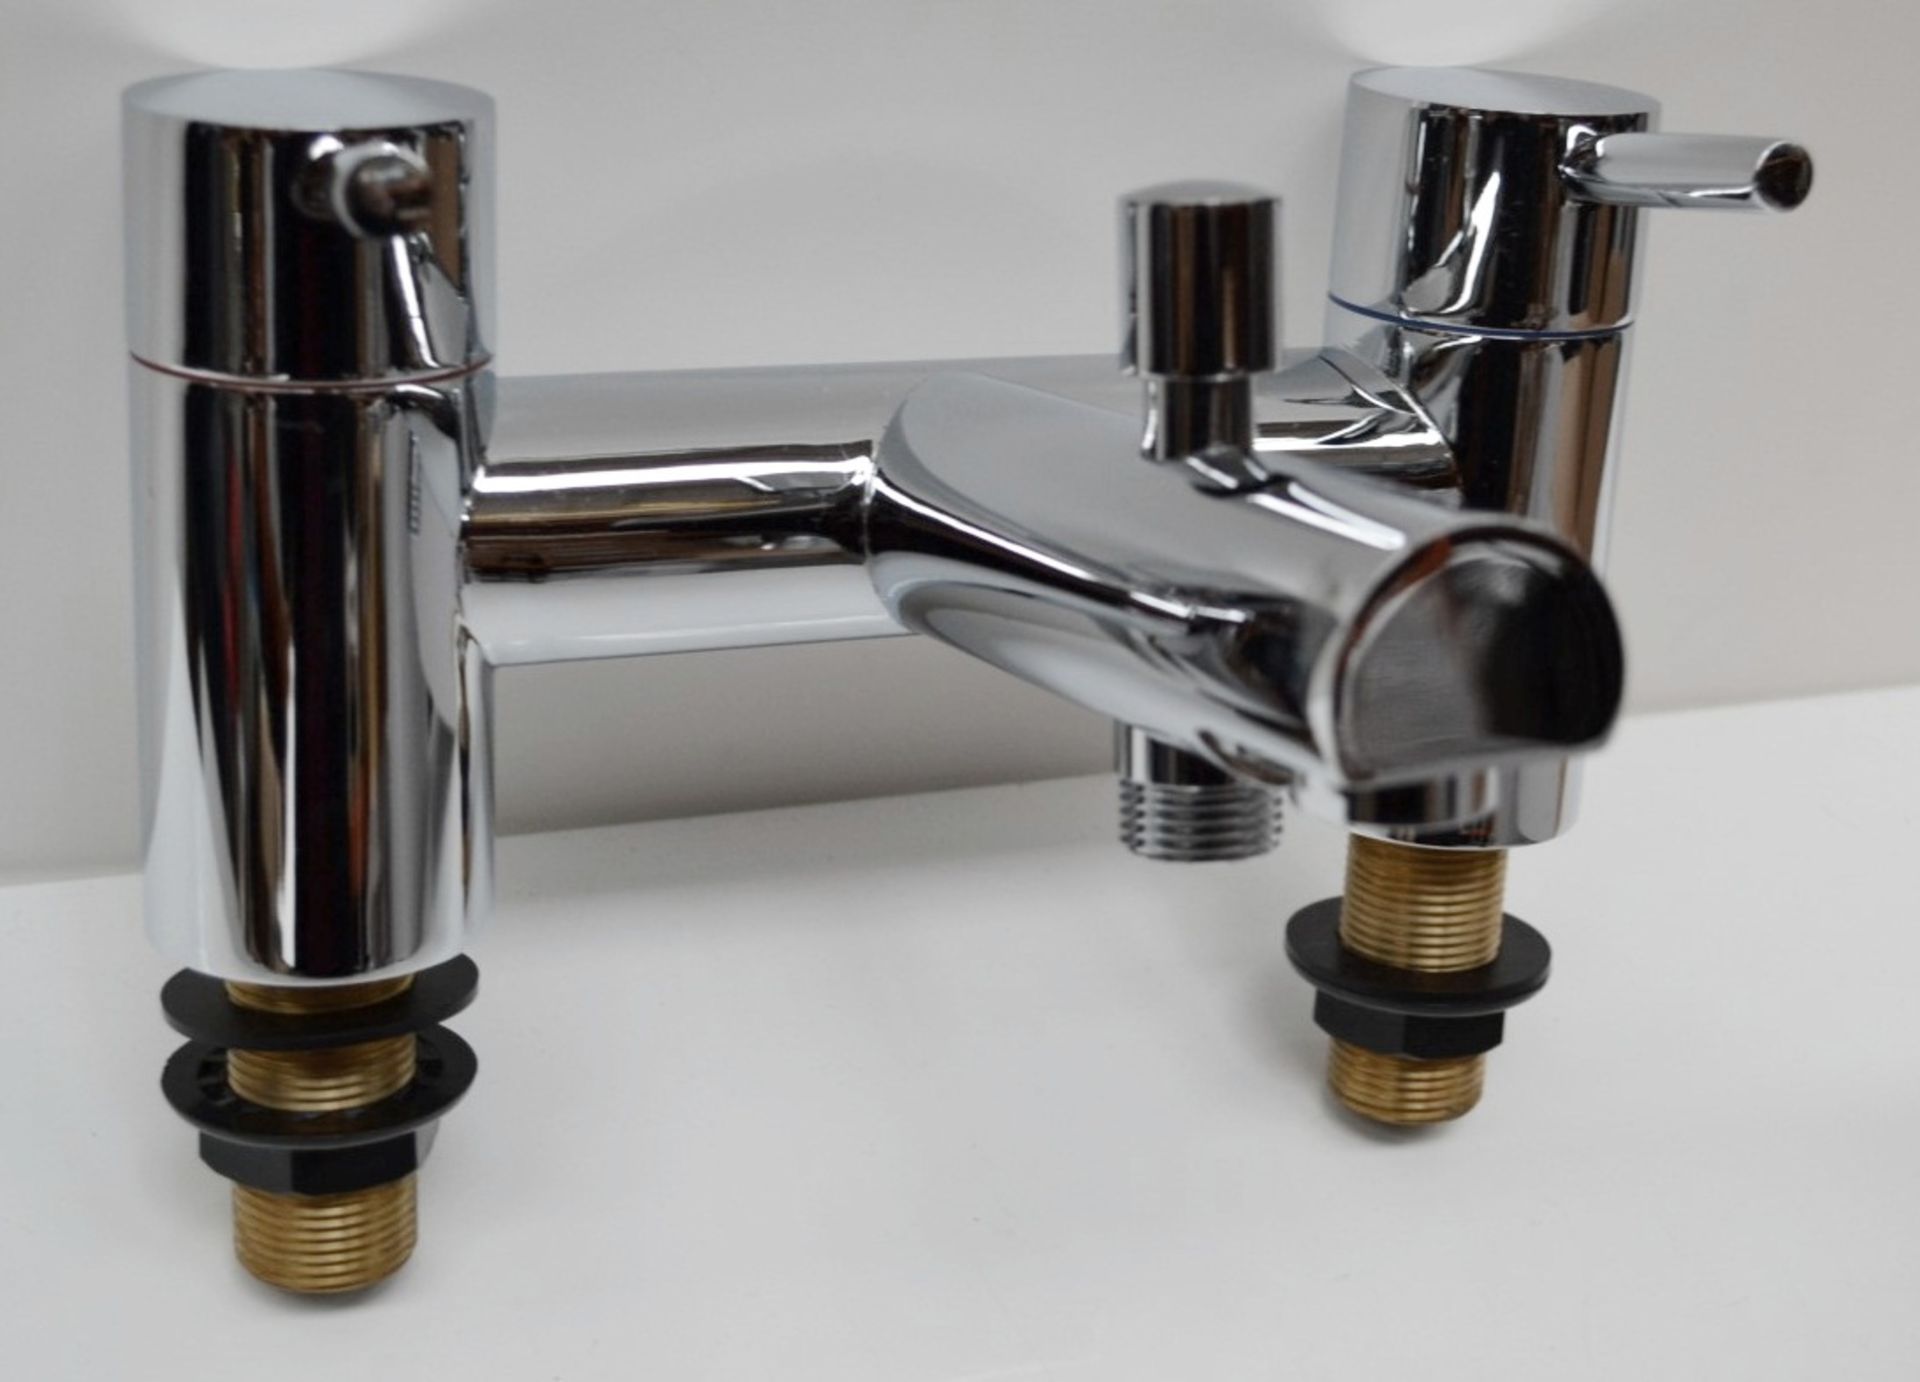 1 x Matrix Bath Mixer Tap - Featuring Modern Style With A Round Shape - Ref: MBI031 - CL190 - Unused - Image 3 of 8